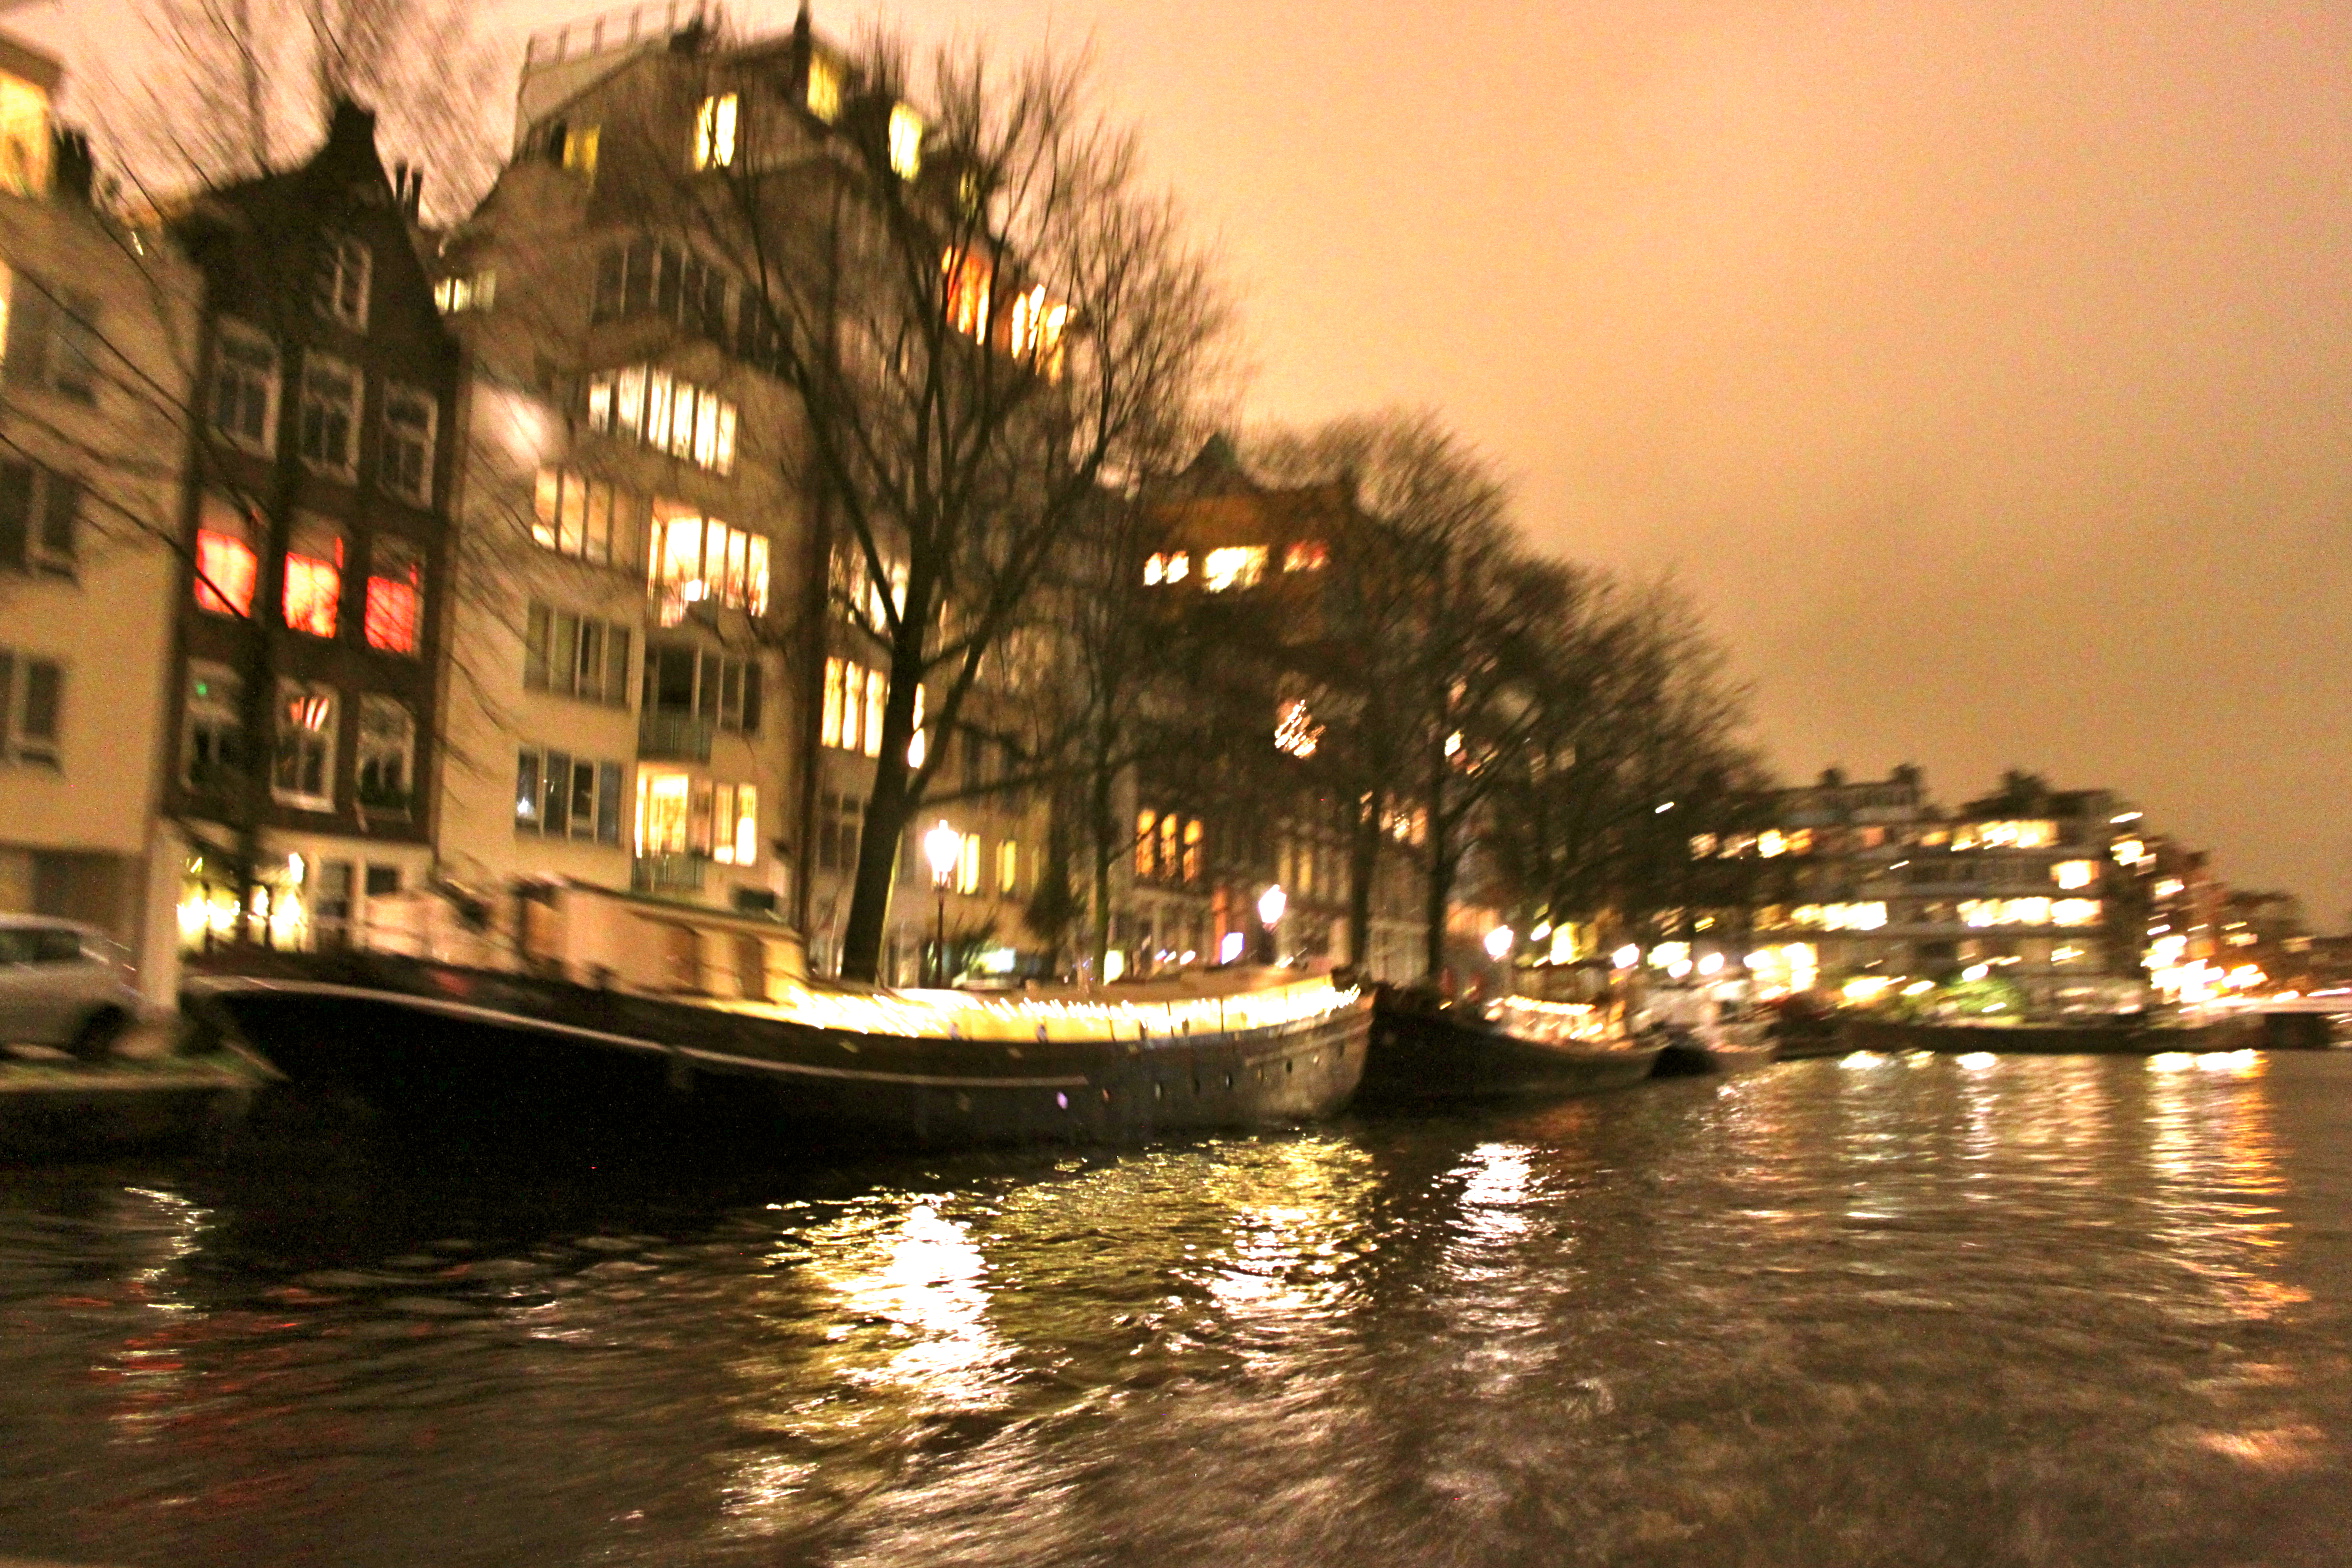 Mr. M & I hopped on a boat cruising the canals for a view of the city at night.